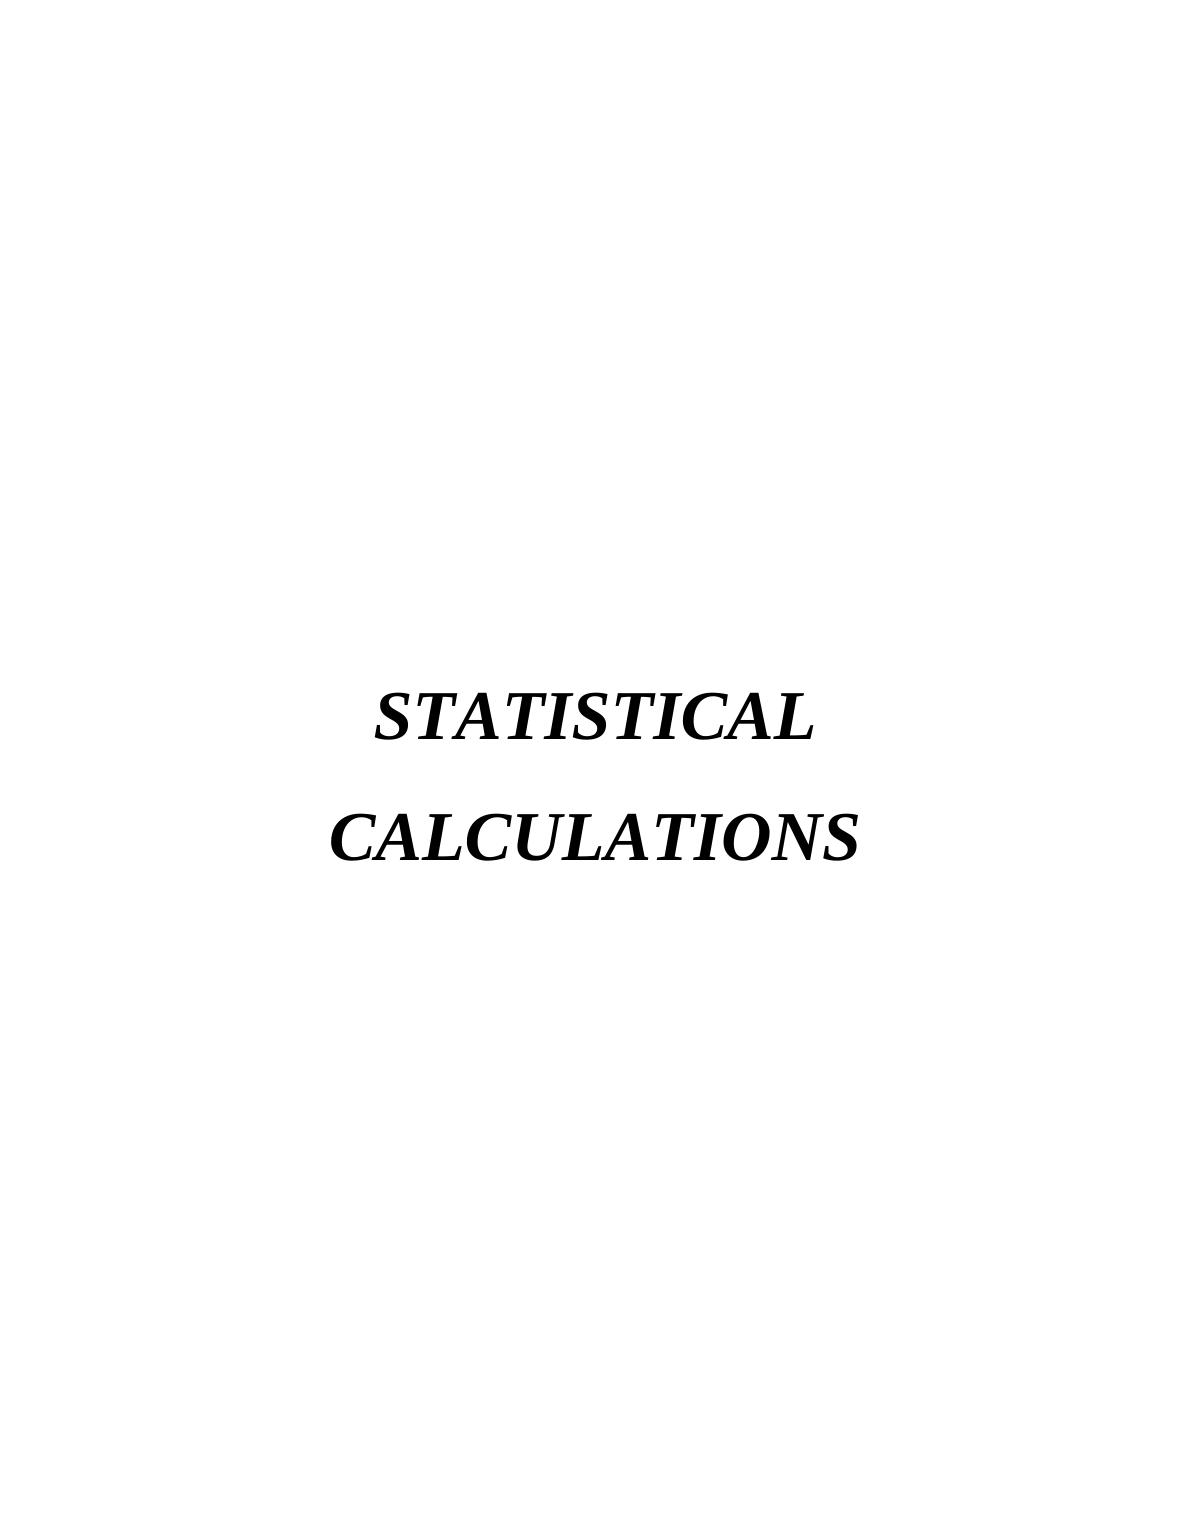 introduction to statistics assignment quizlet